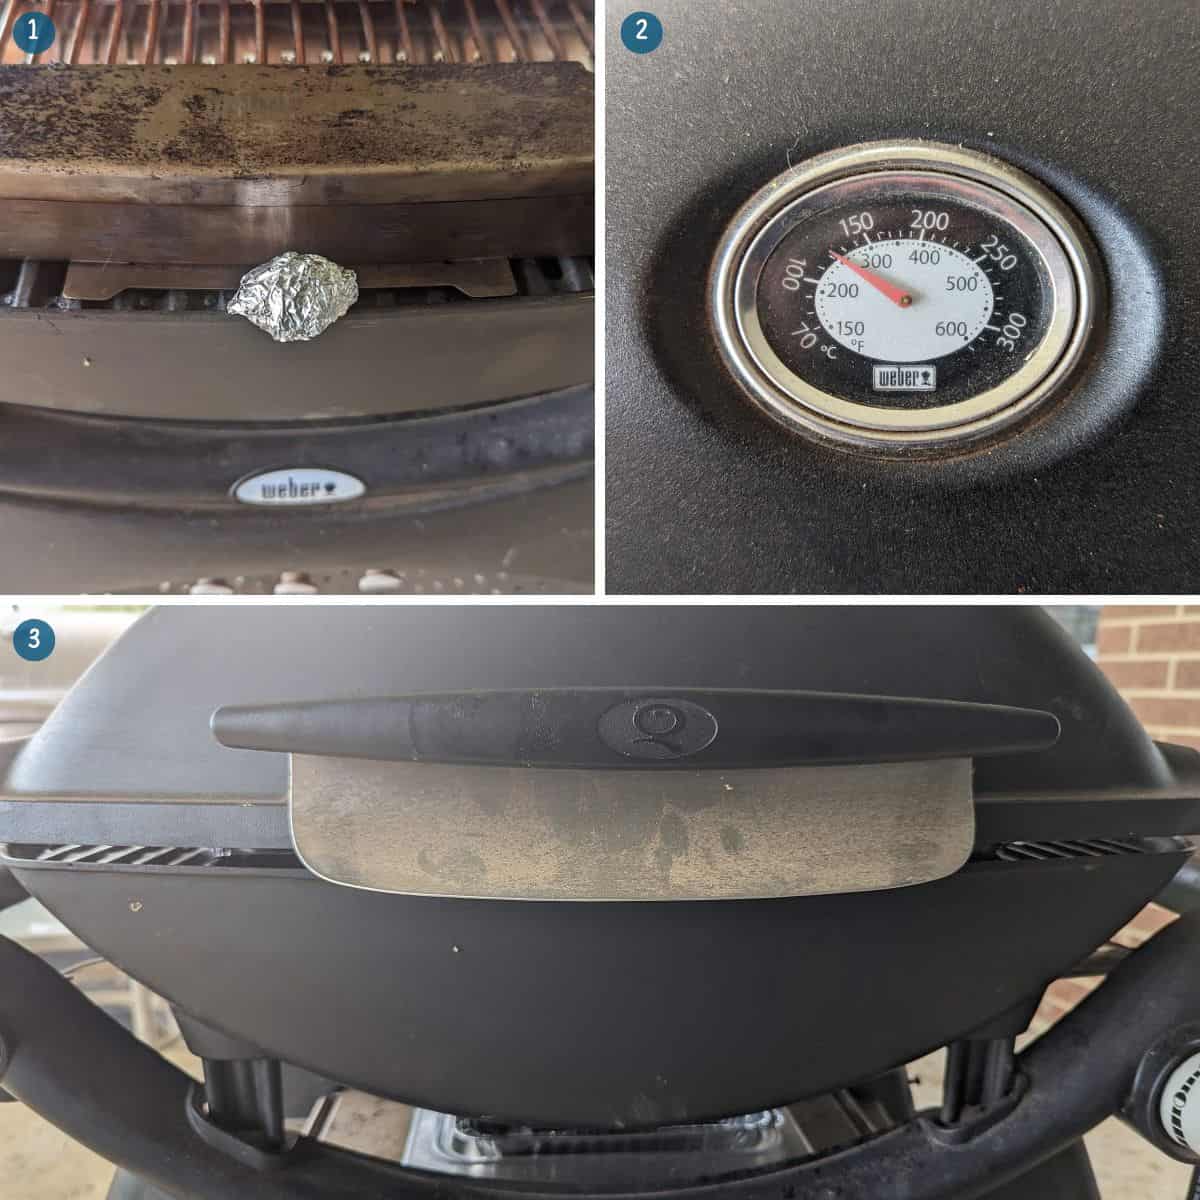 How to cook low and slow on the Weber Q BBQ